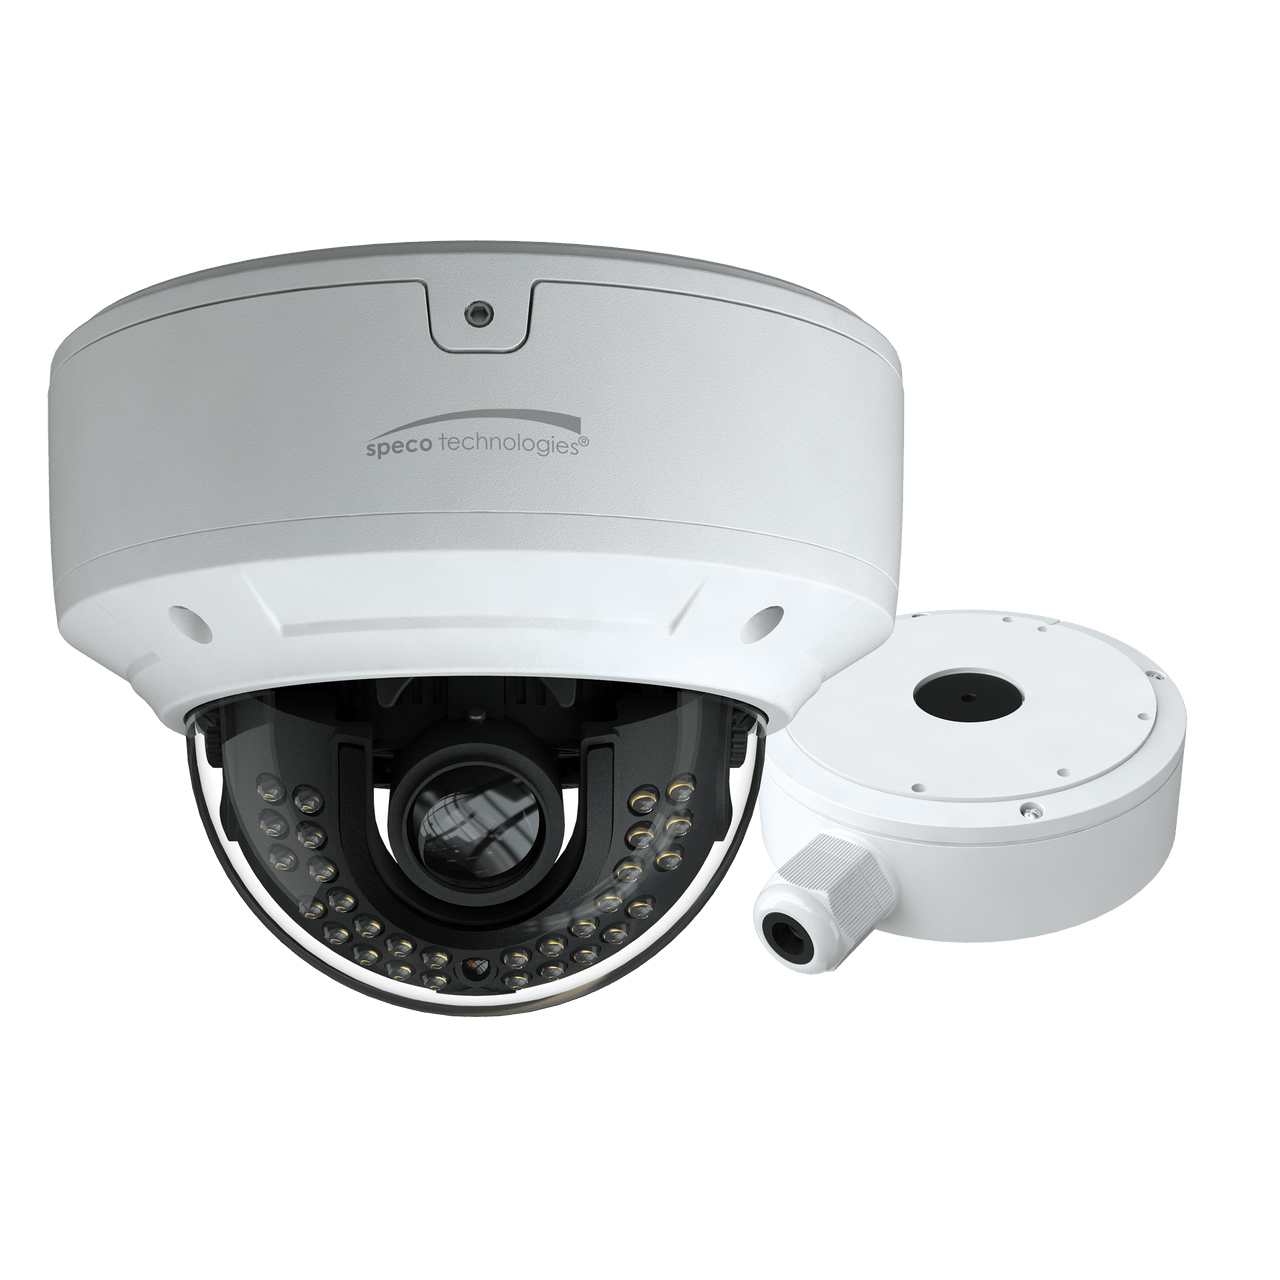 Speco Technologies O8D7M 8MP H.265 IP Dome Camera with IR, 2.8-12mm Motorized lens, Junction Box, White Housing (O8D7M)